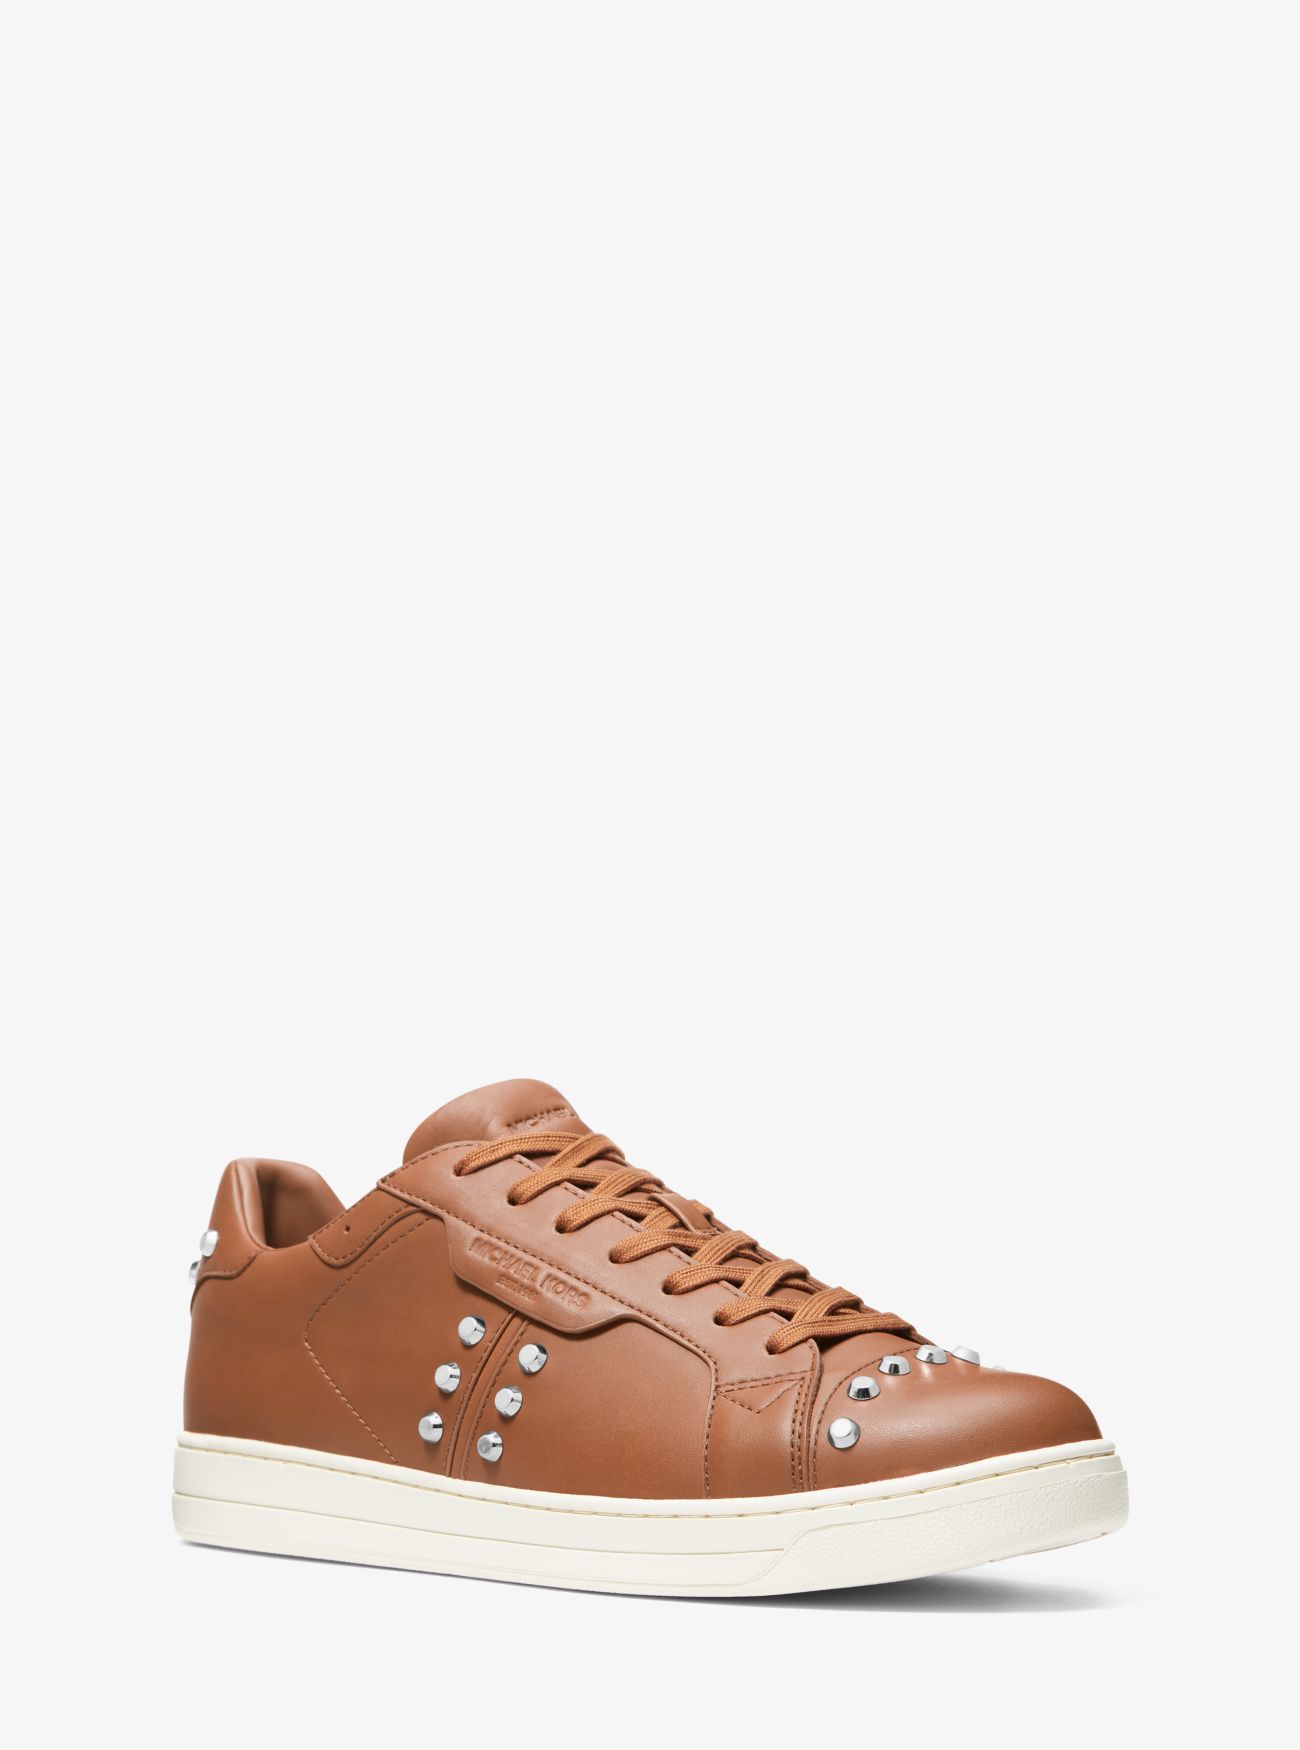 MK Keating Studded Leather Trainers - Brown - Michael Kors